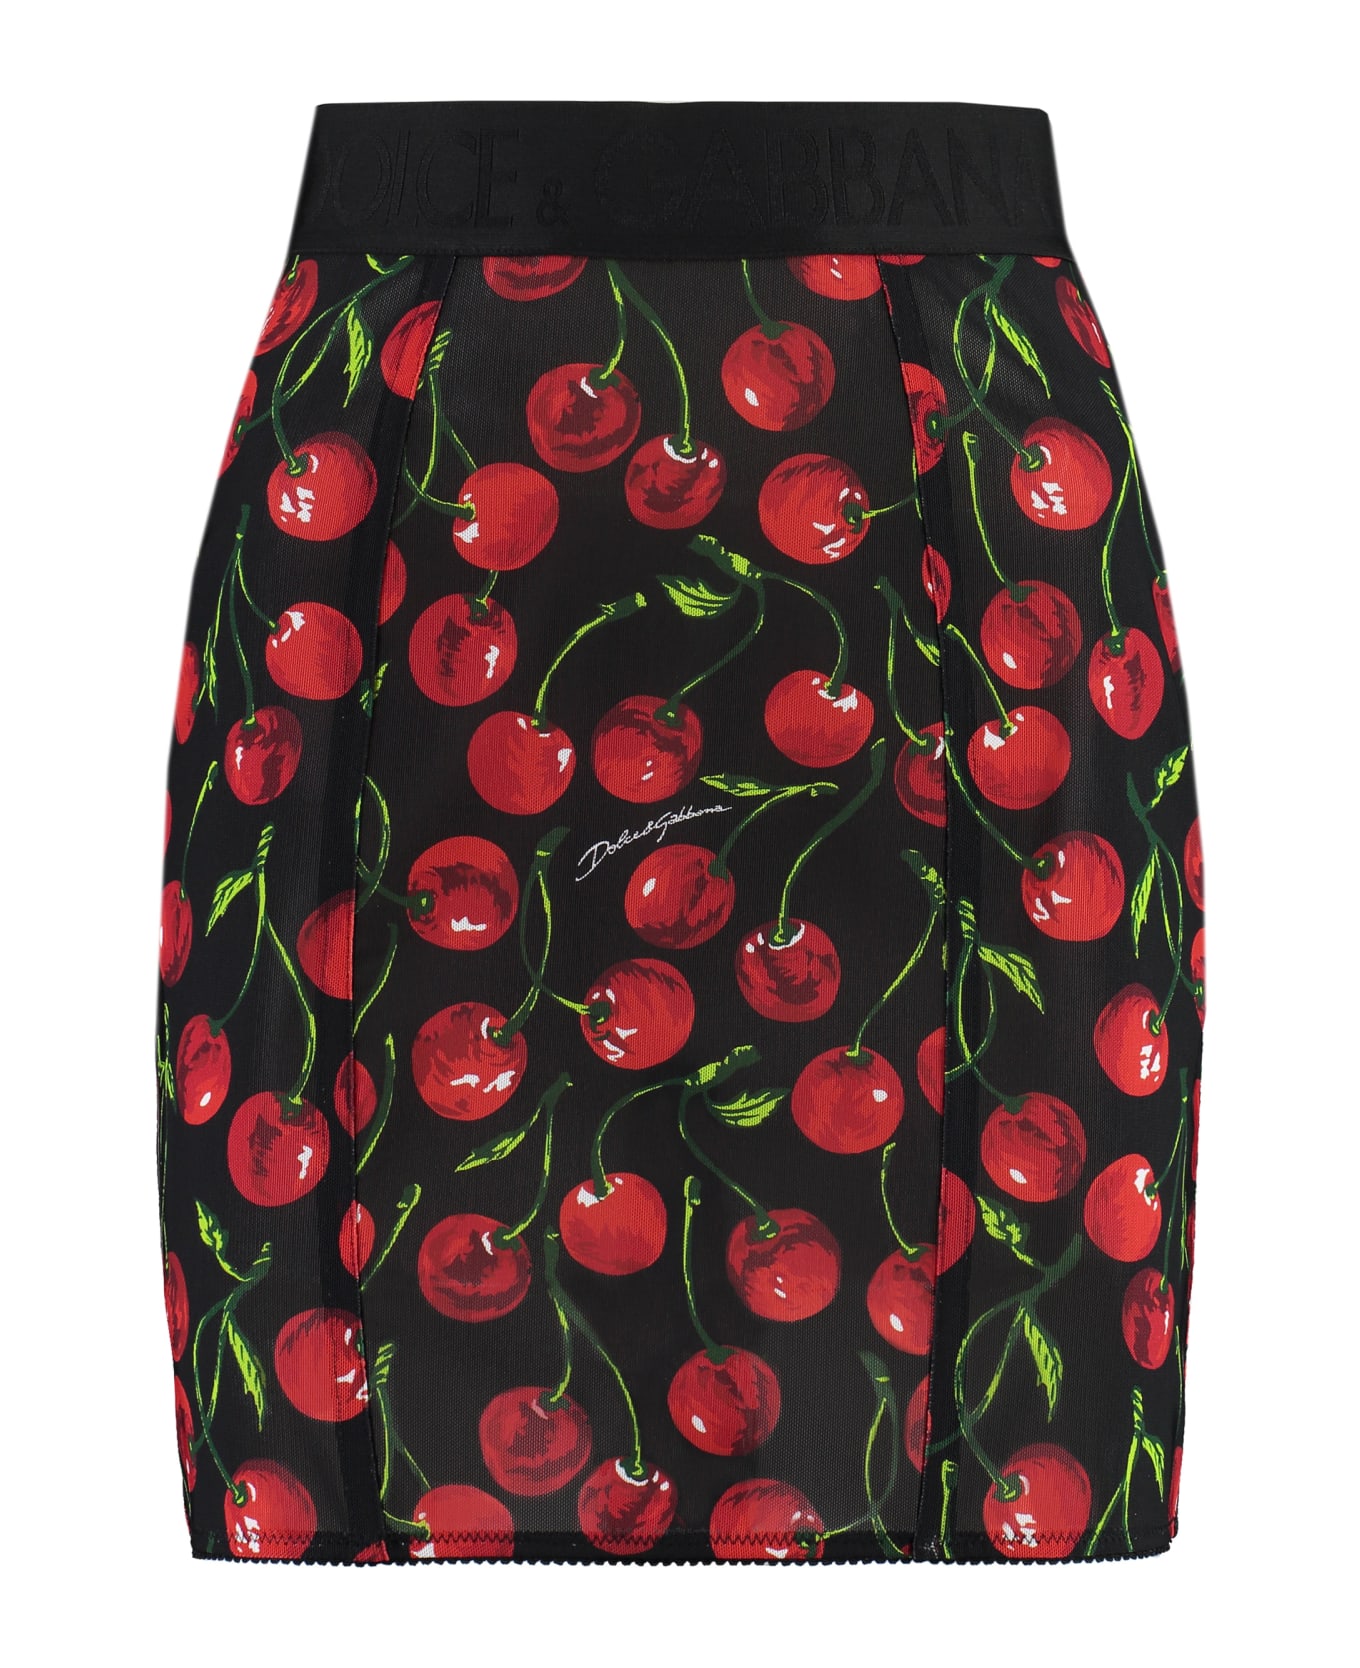 Dolce & Gabbana Mini-skirt With All-over Cherry Print - Multicolor